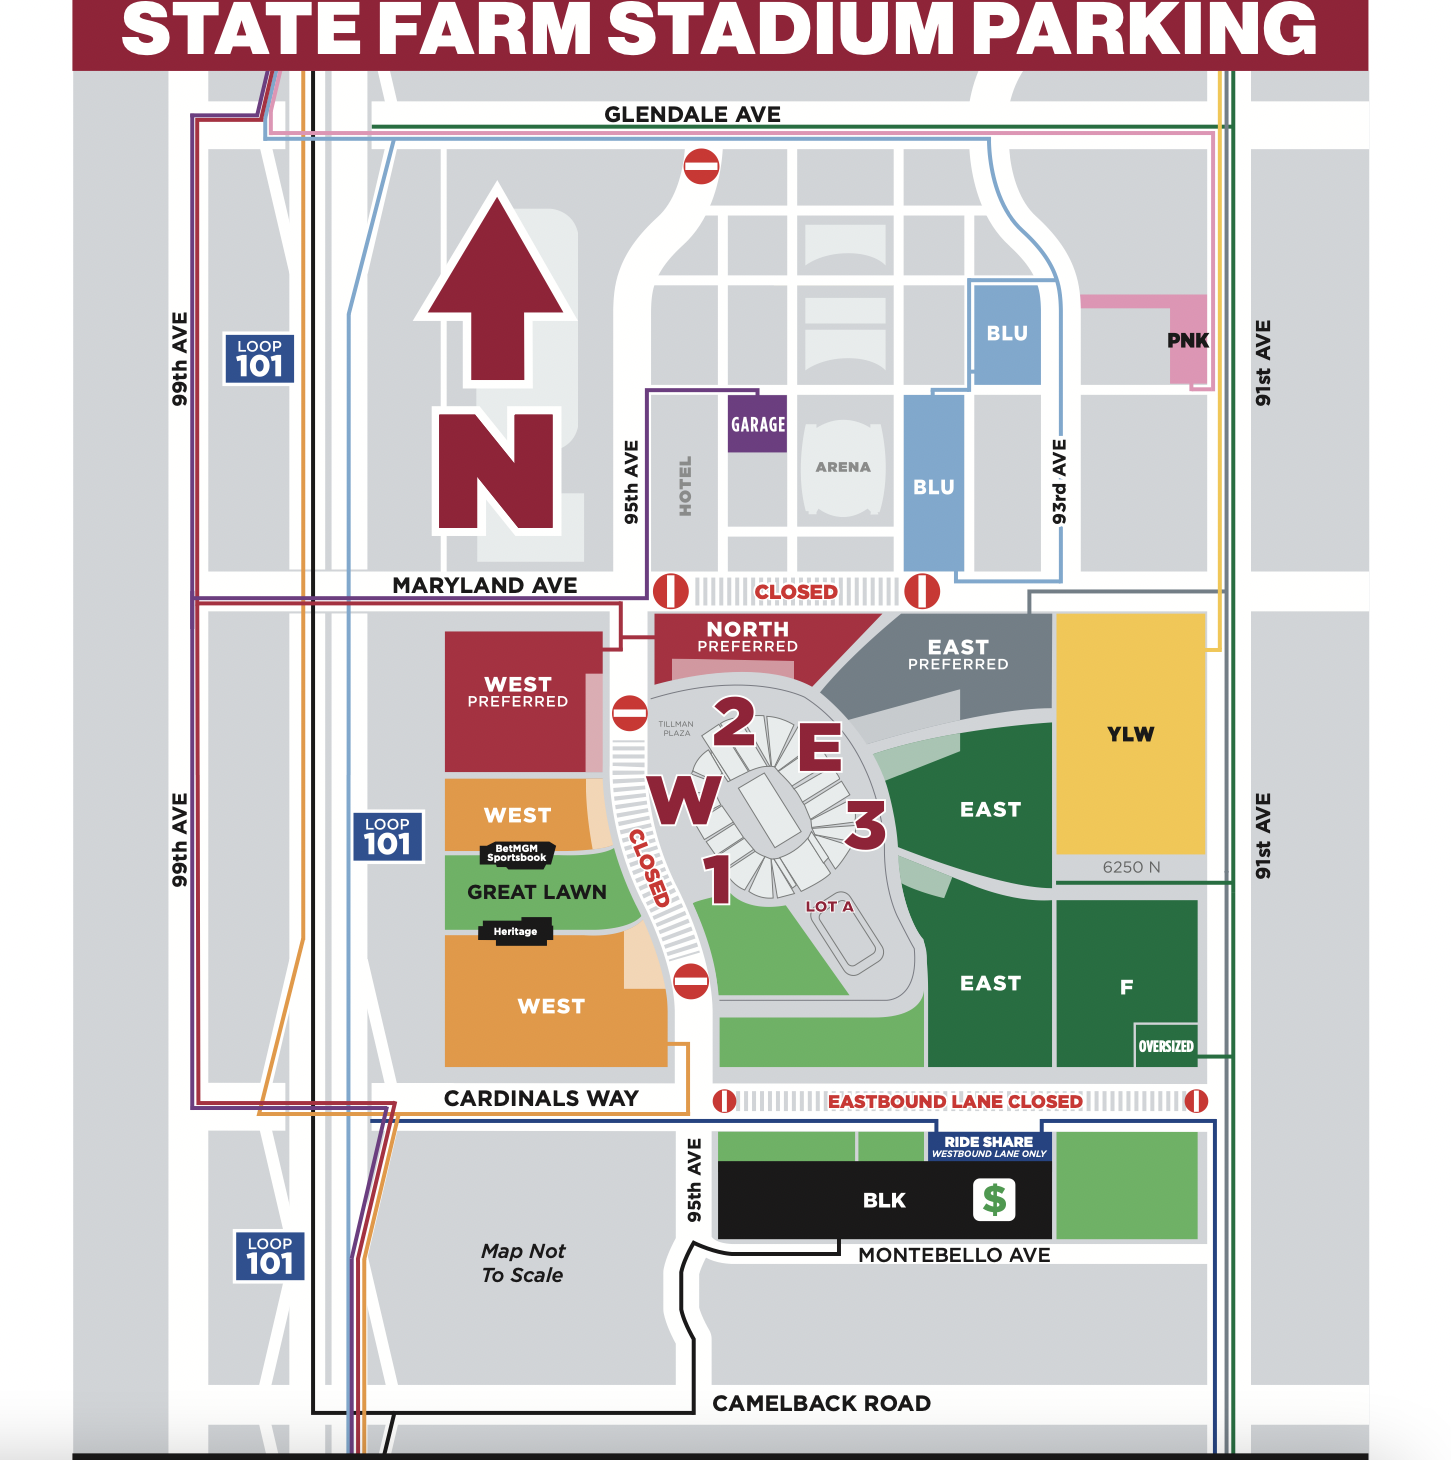 State Farm Stadium: What you need to know to make it a great day